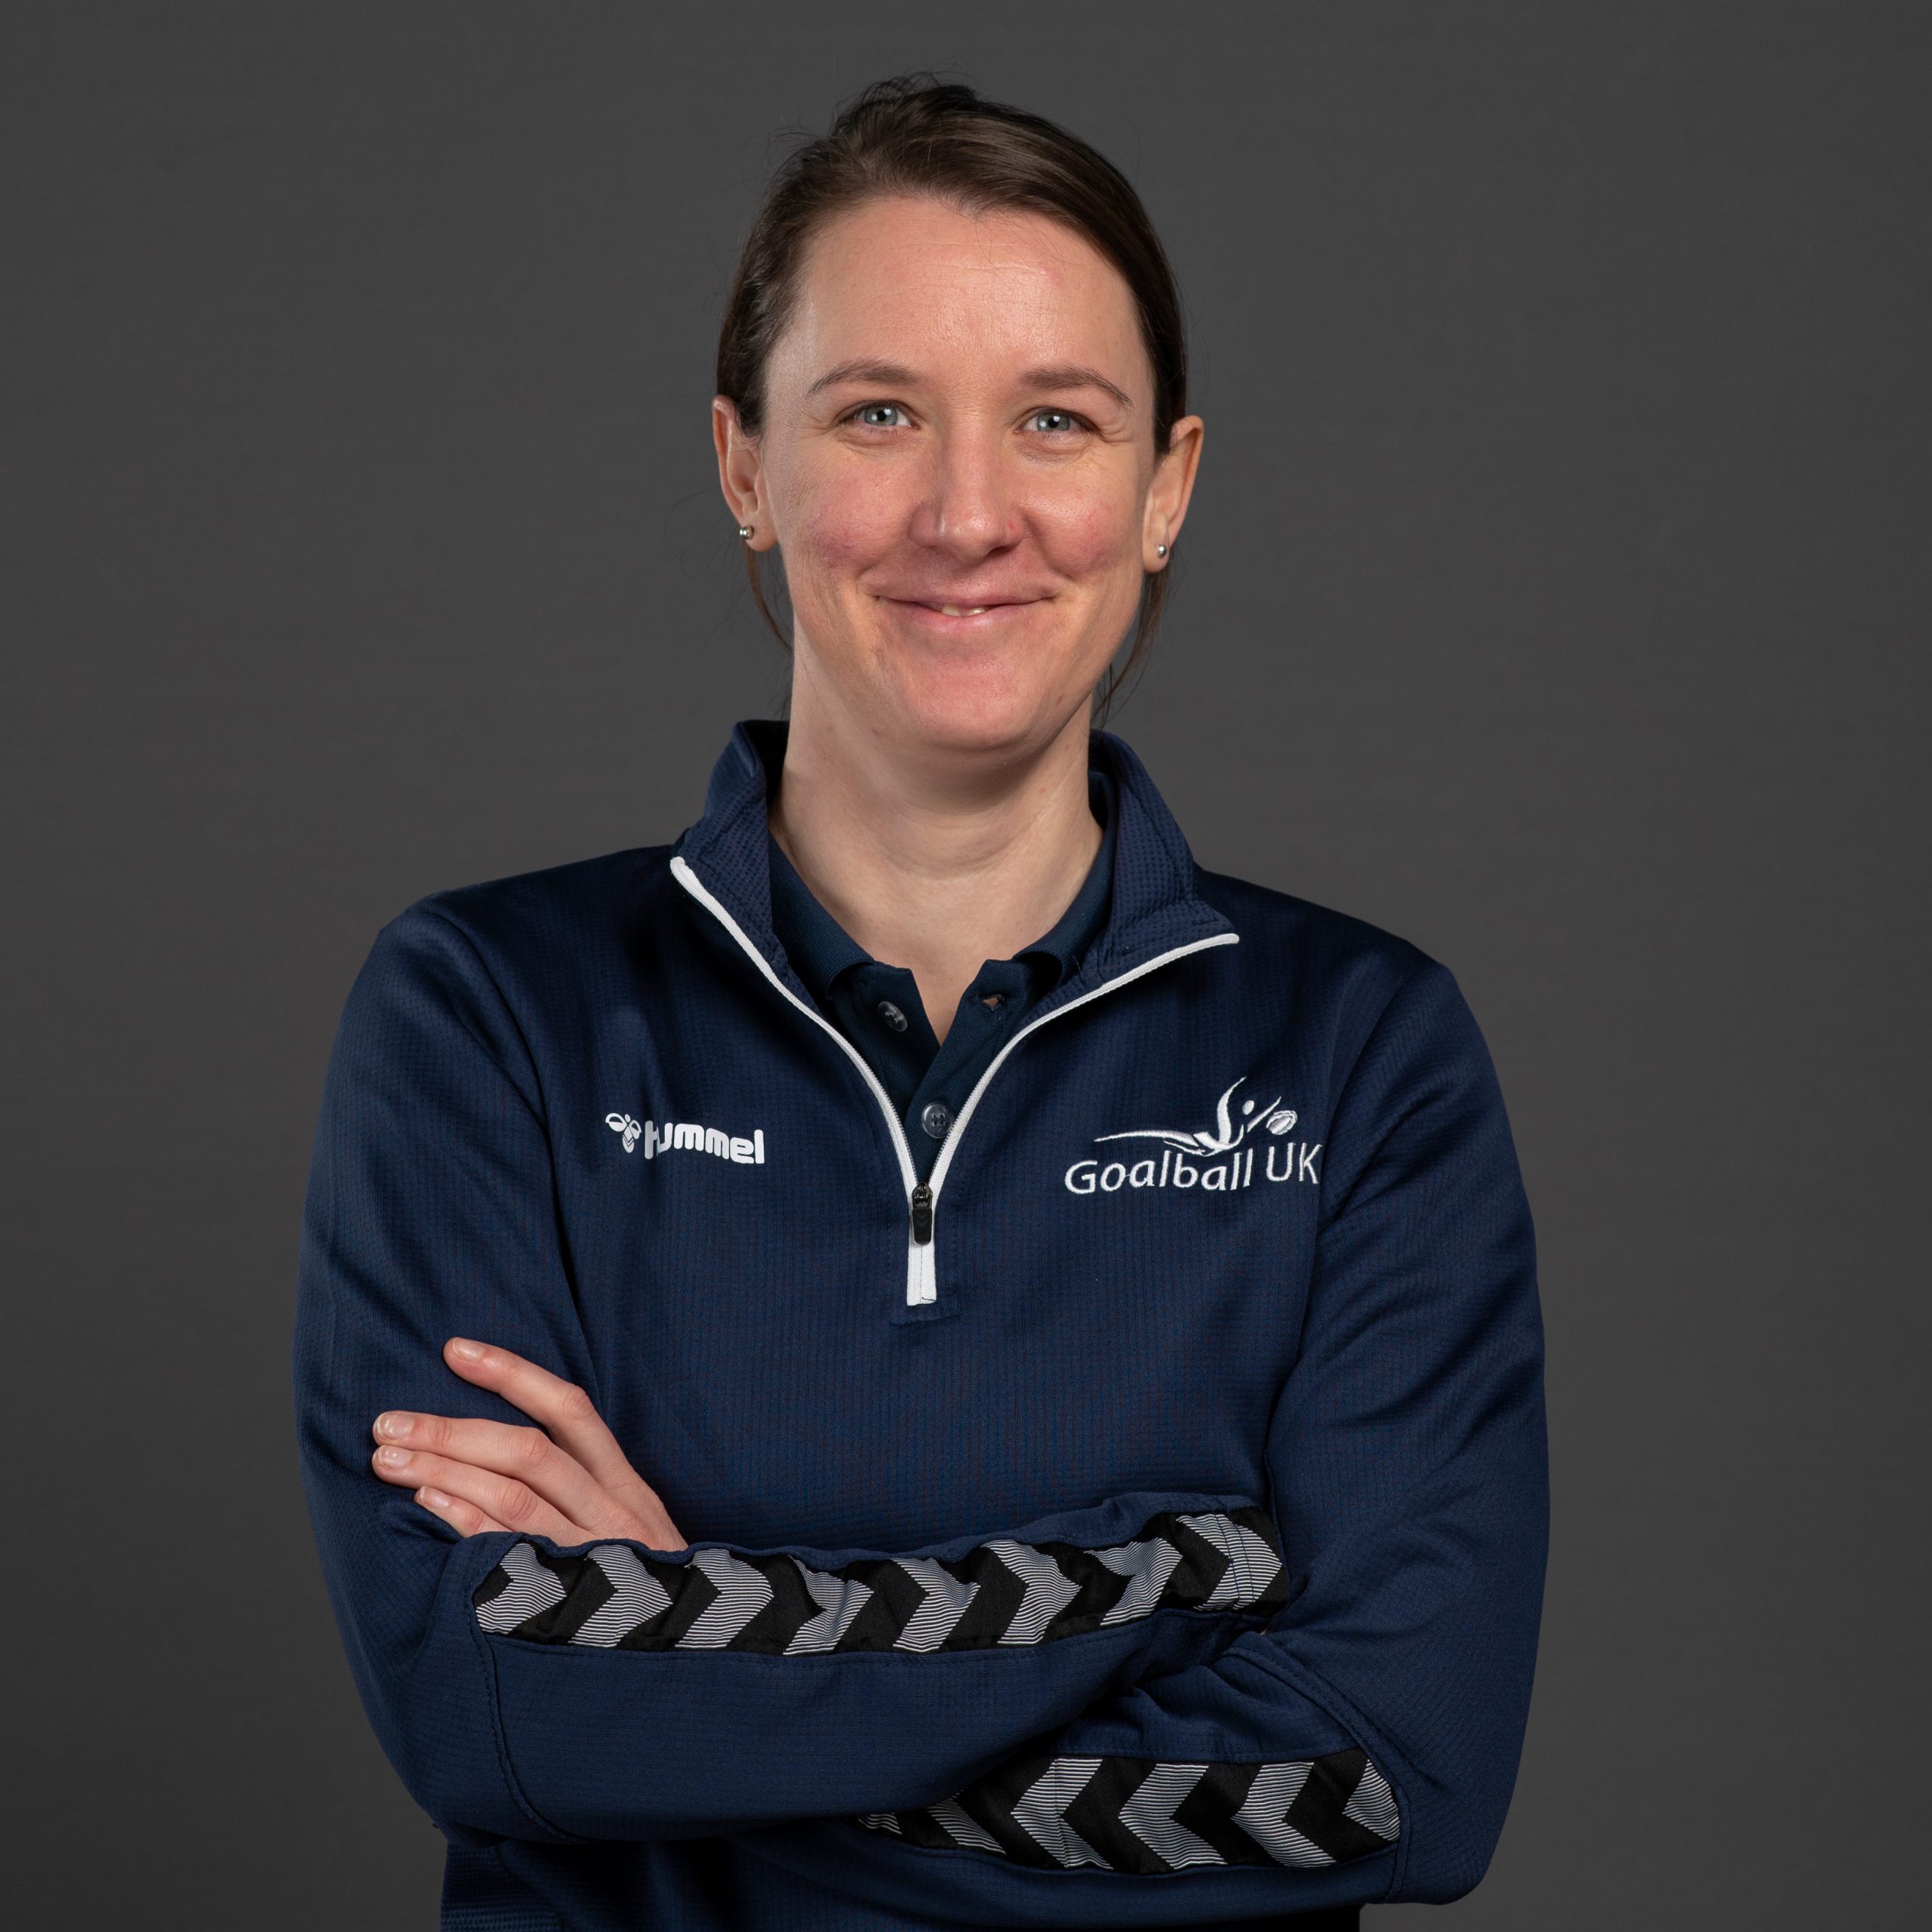 Faye Dale headshot. Faye is wearing a dark blue Goalball UK jumper and is stood with arms folded against a dark grey background.